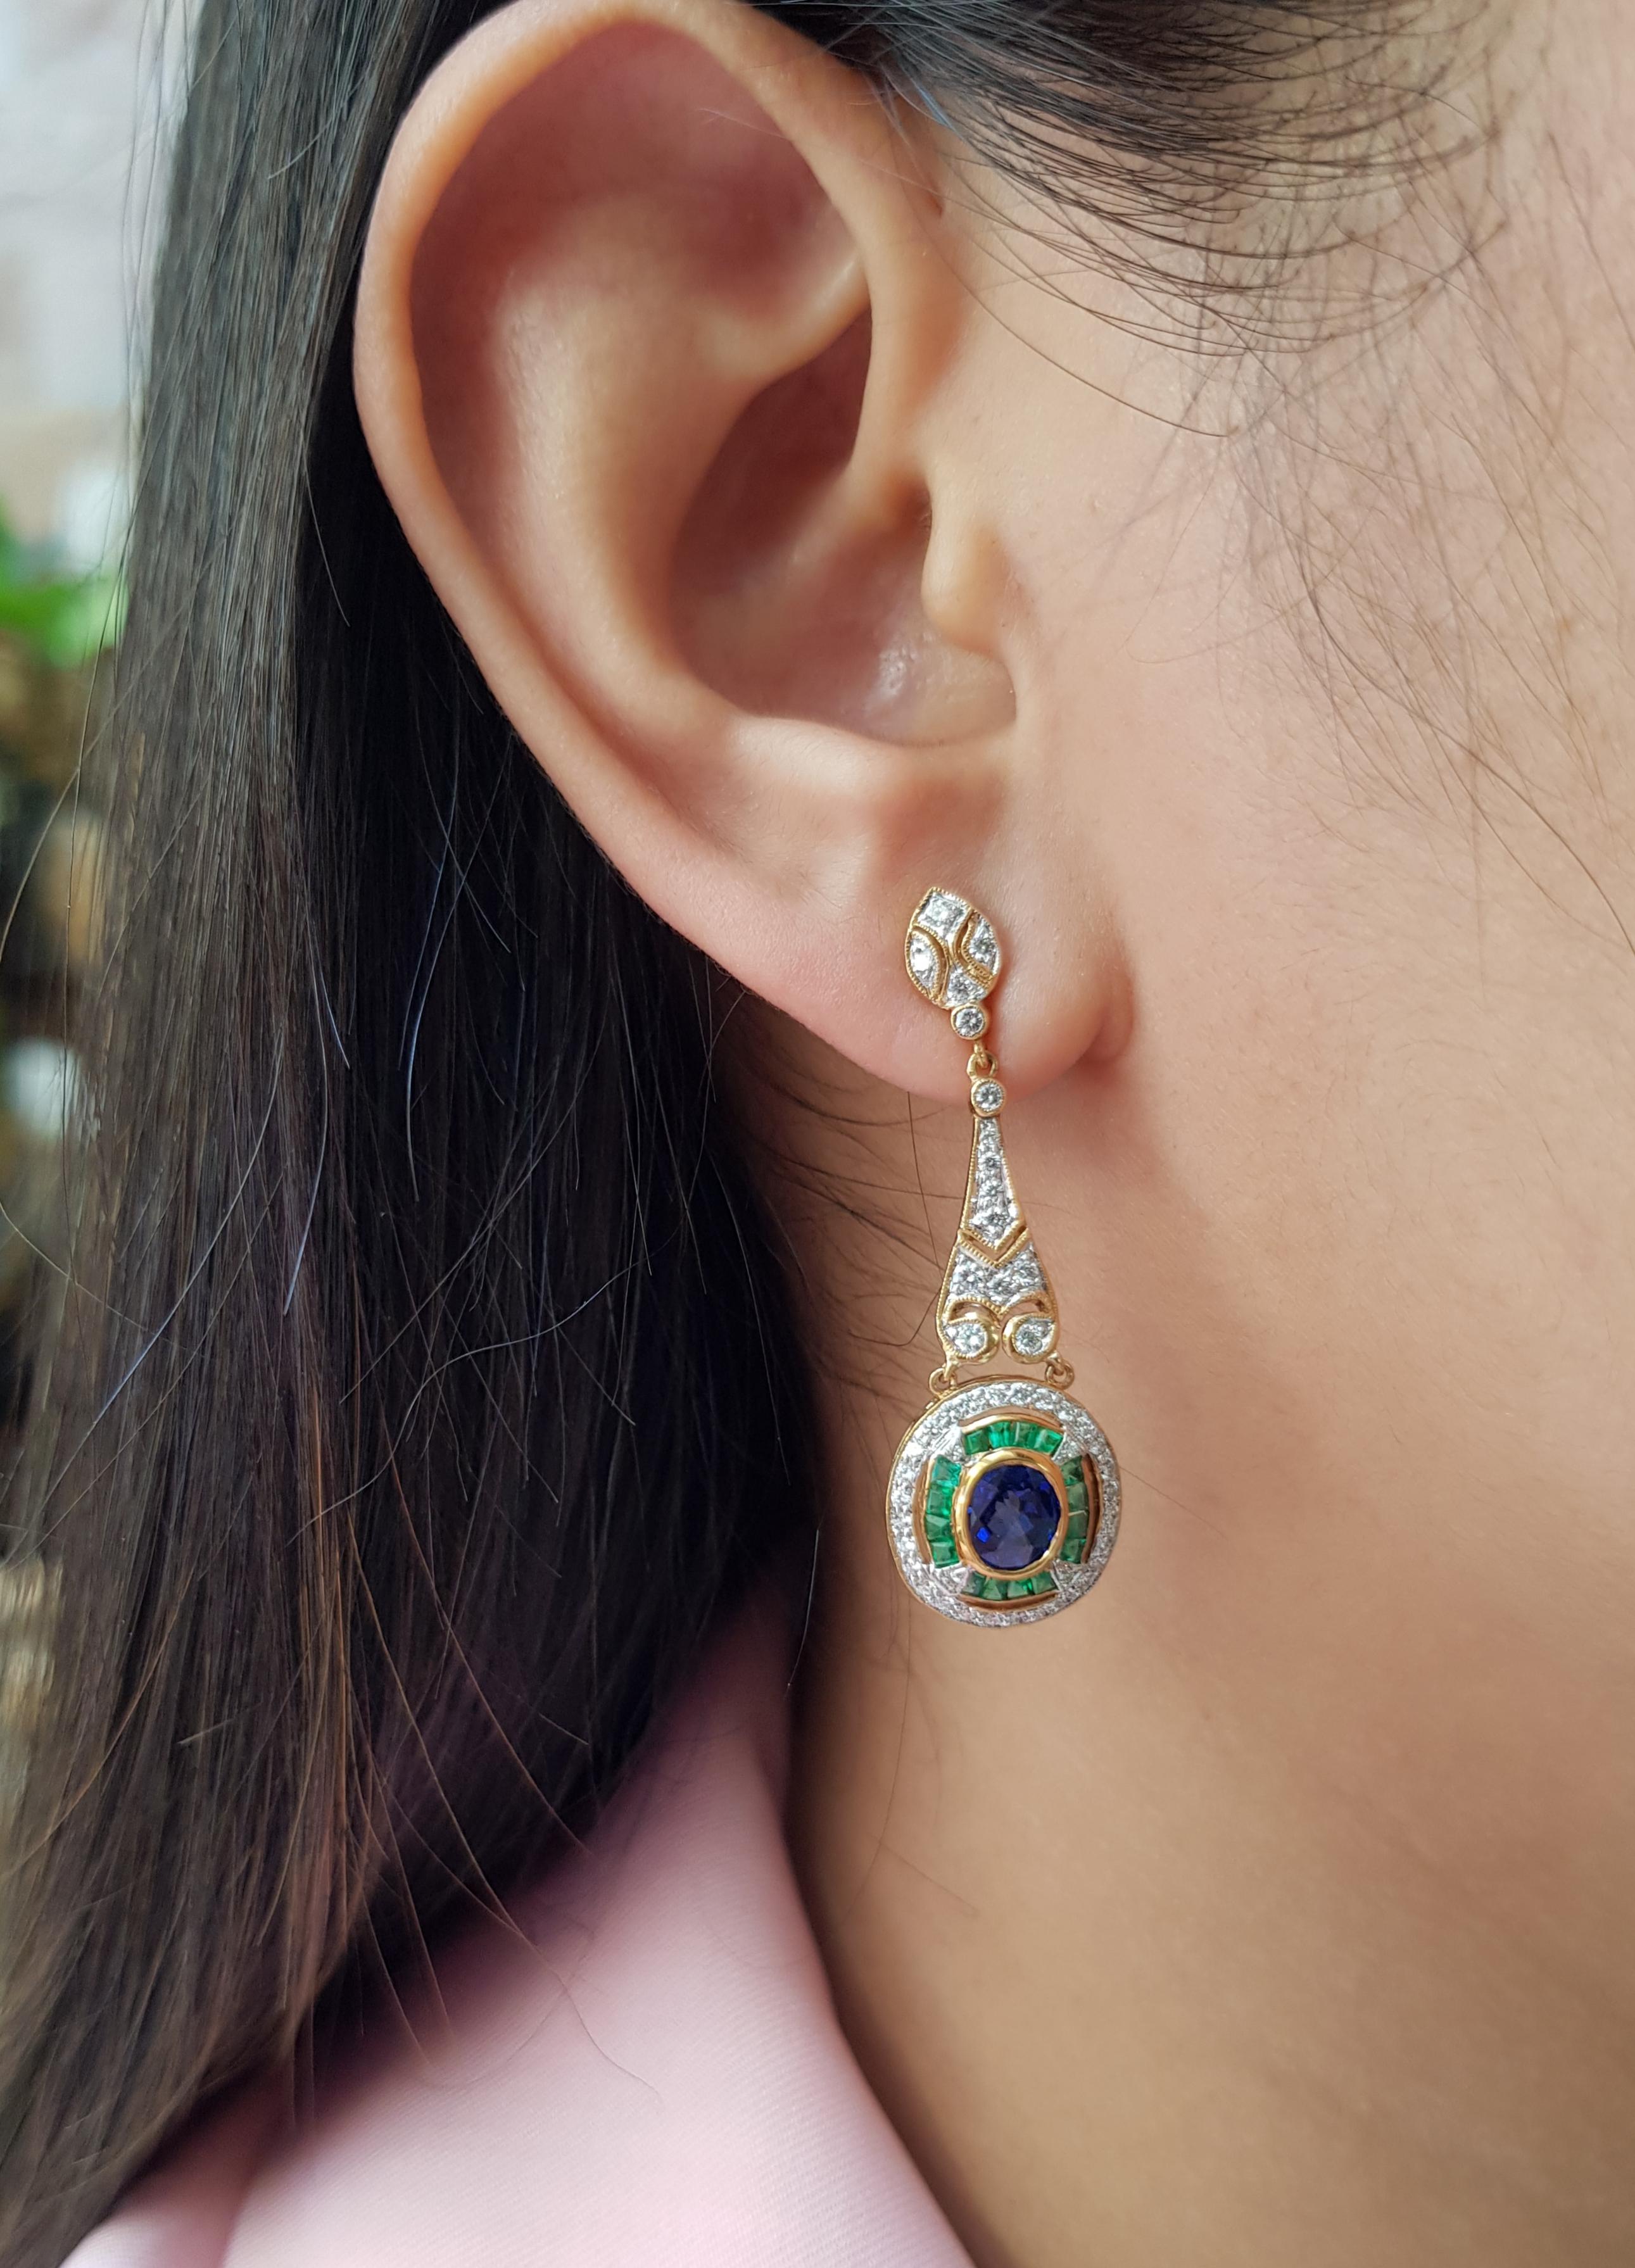 Blue Sapphire 1.65 carats with Emerald 0.82 carat and Diamond 0.84 carats Earrings set in 18 Karat Gold Settings

Width: 1.3 cm
Length: 4.1 cm 

